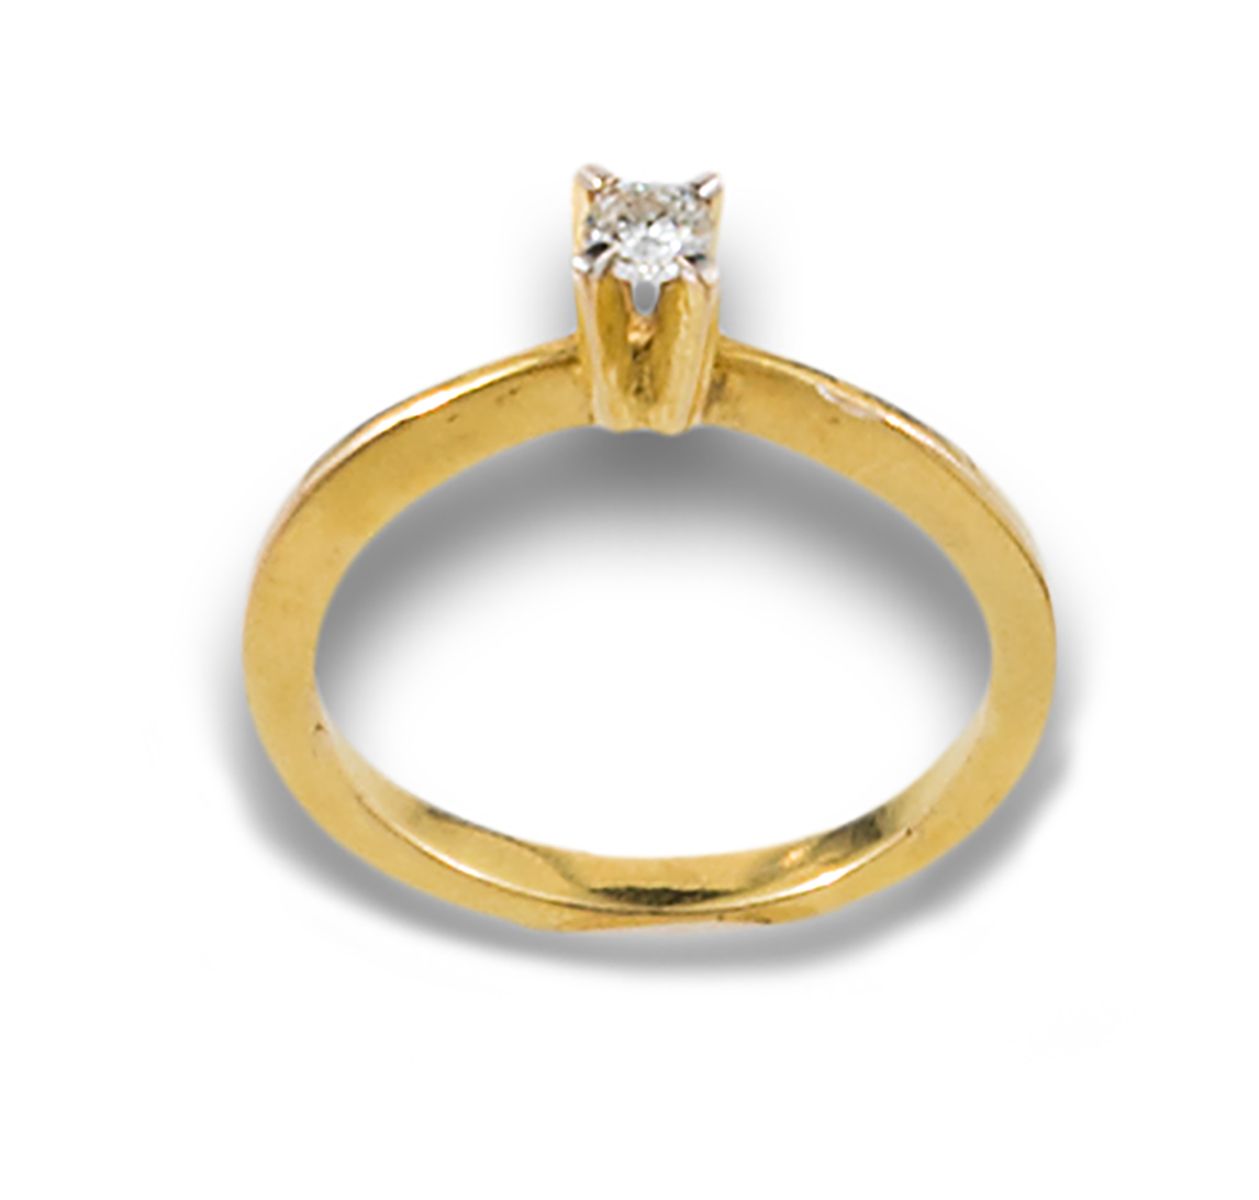 18 kt yellow gold solitaire ring. Composed of a brilliant cut diamond, estimated&hellip;